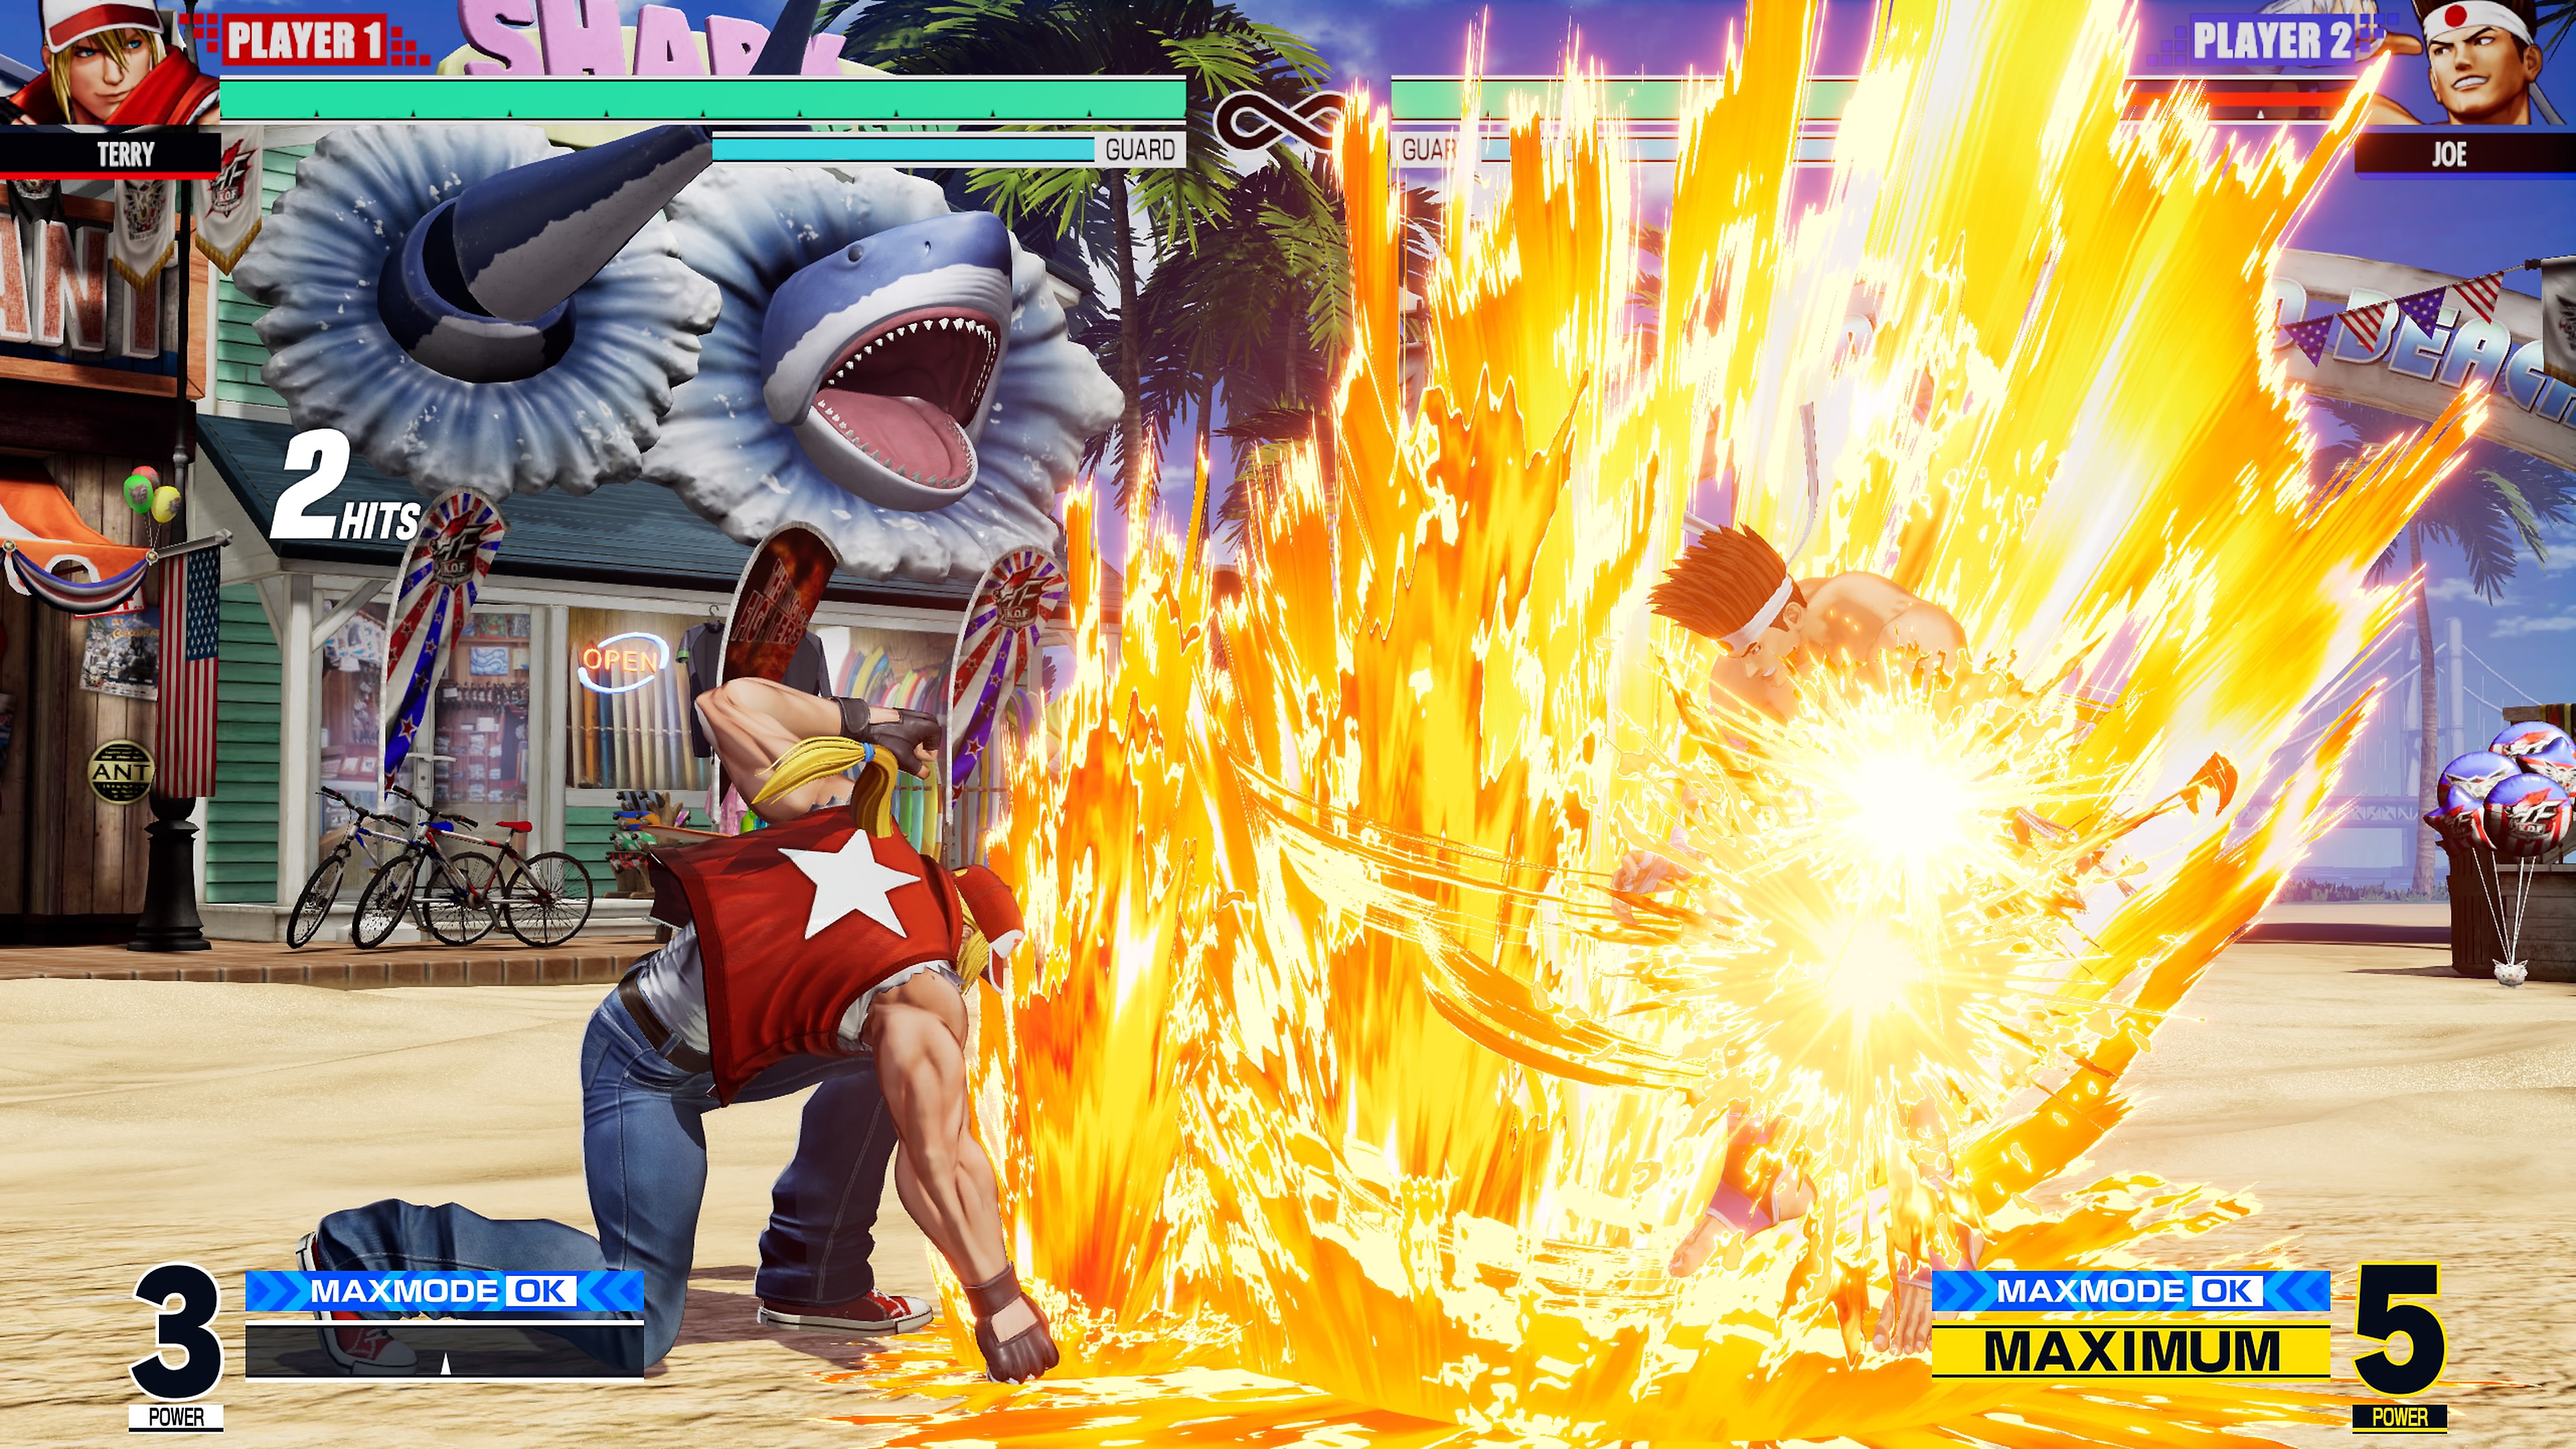 The King of Fighters XV - Gallery Screenshot 5